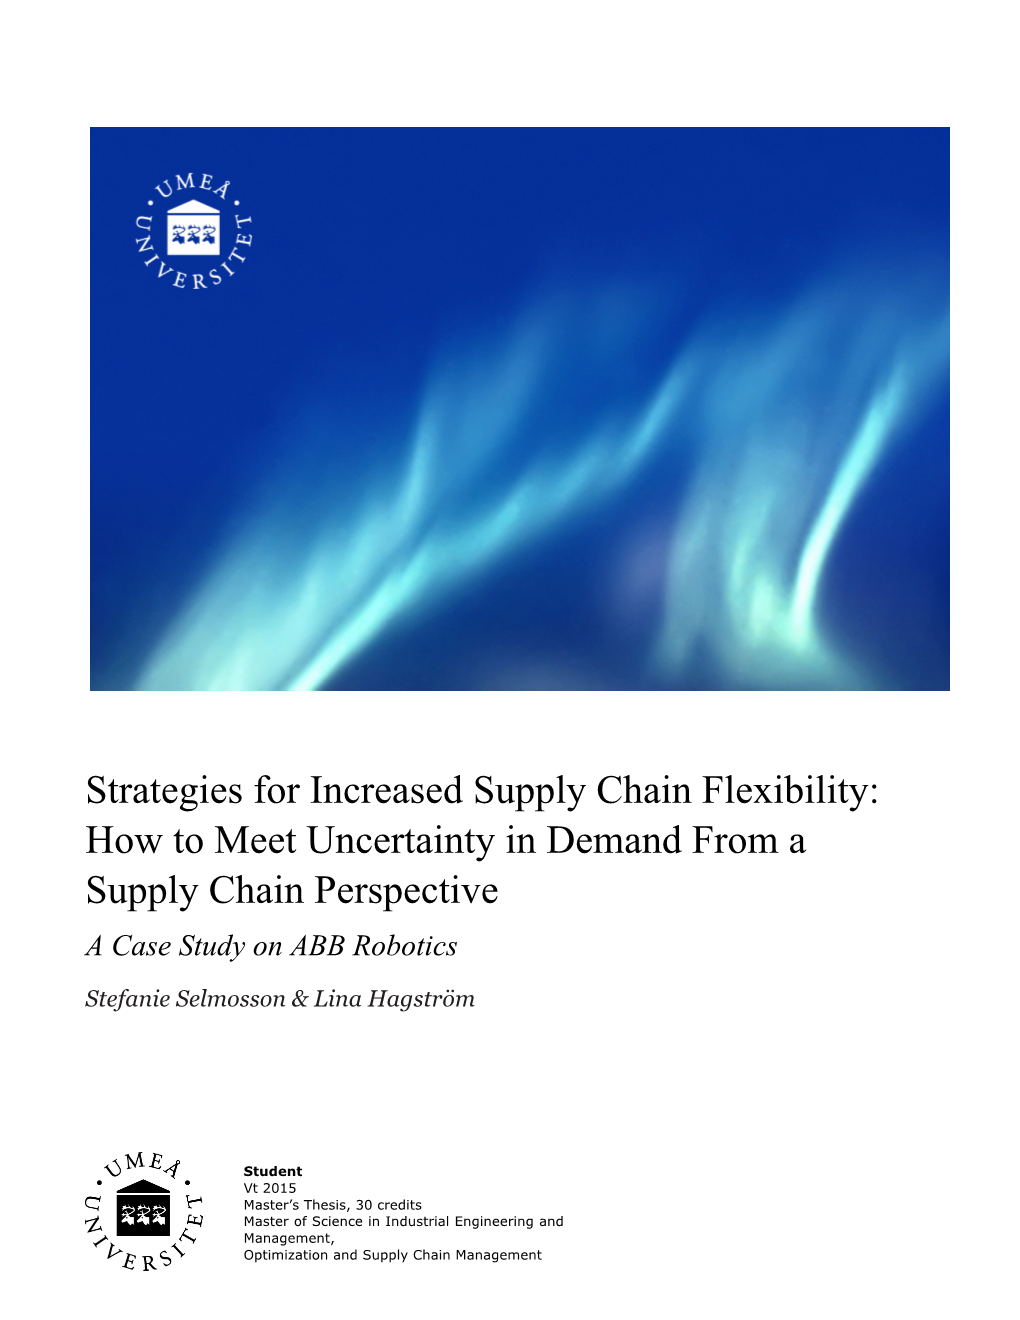 Strategies for Increased Supply Chain Flexibility